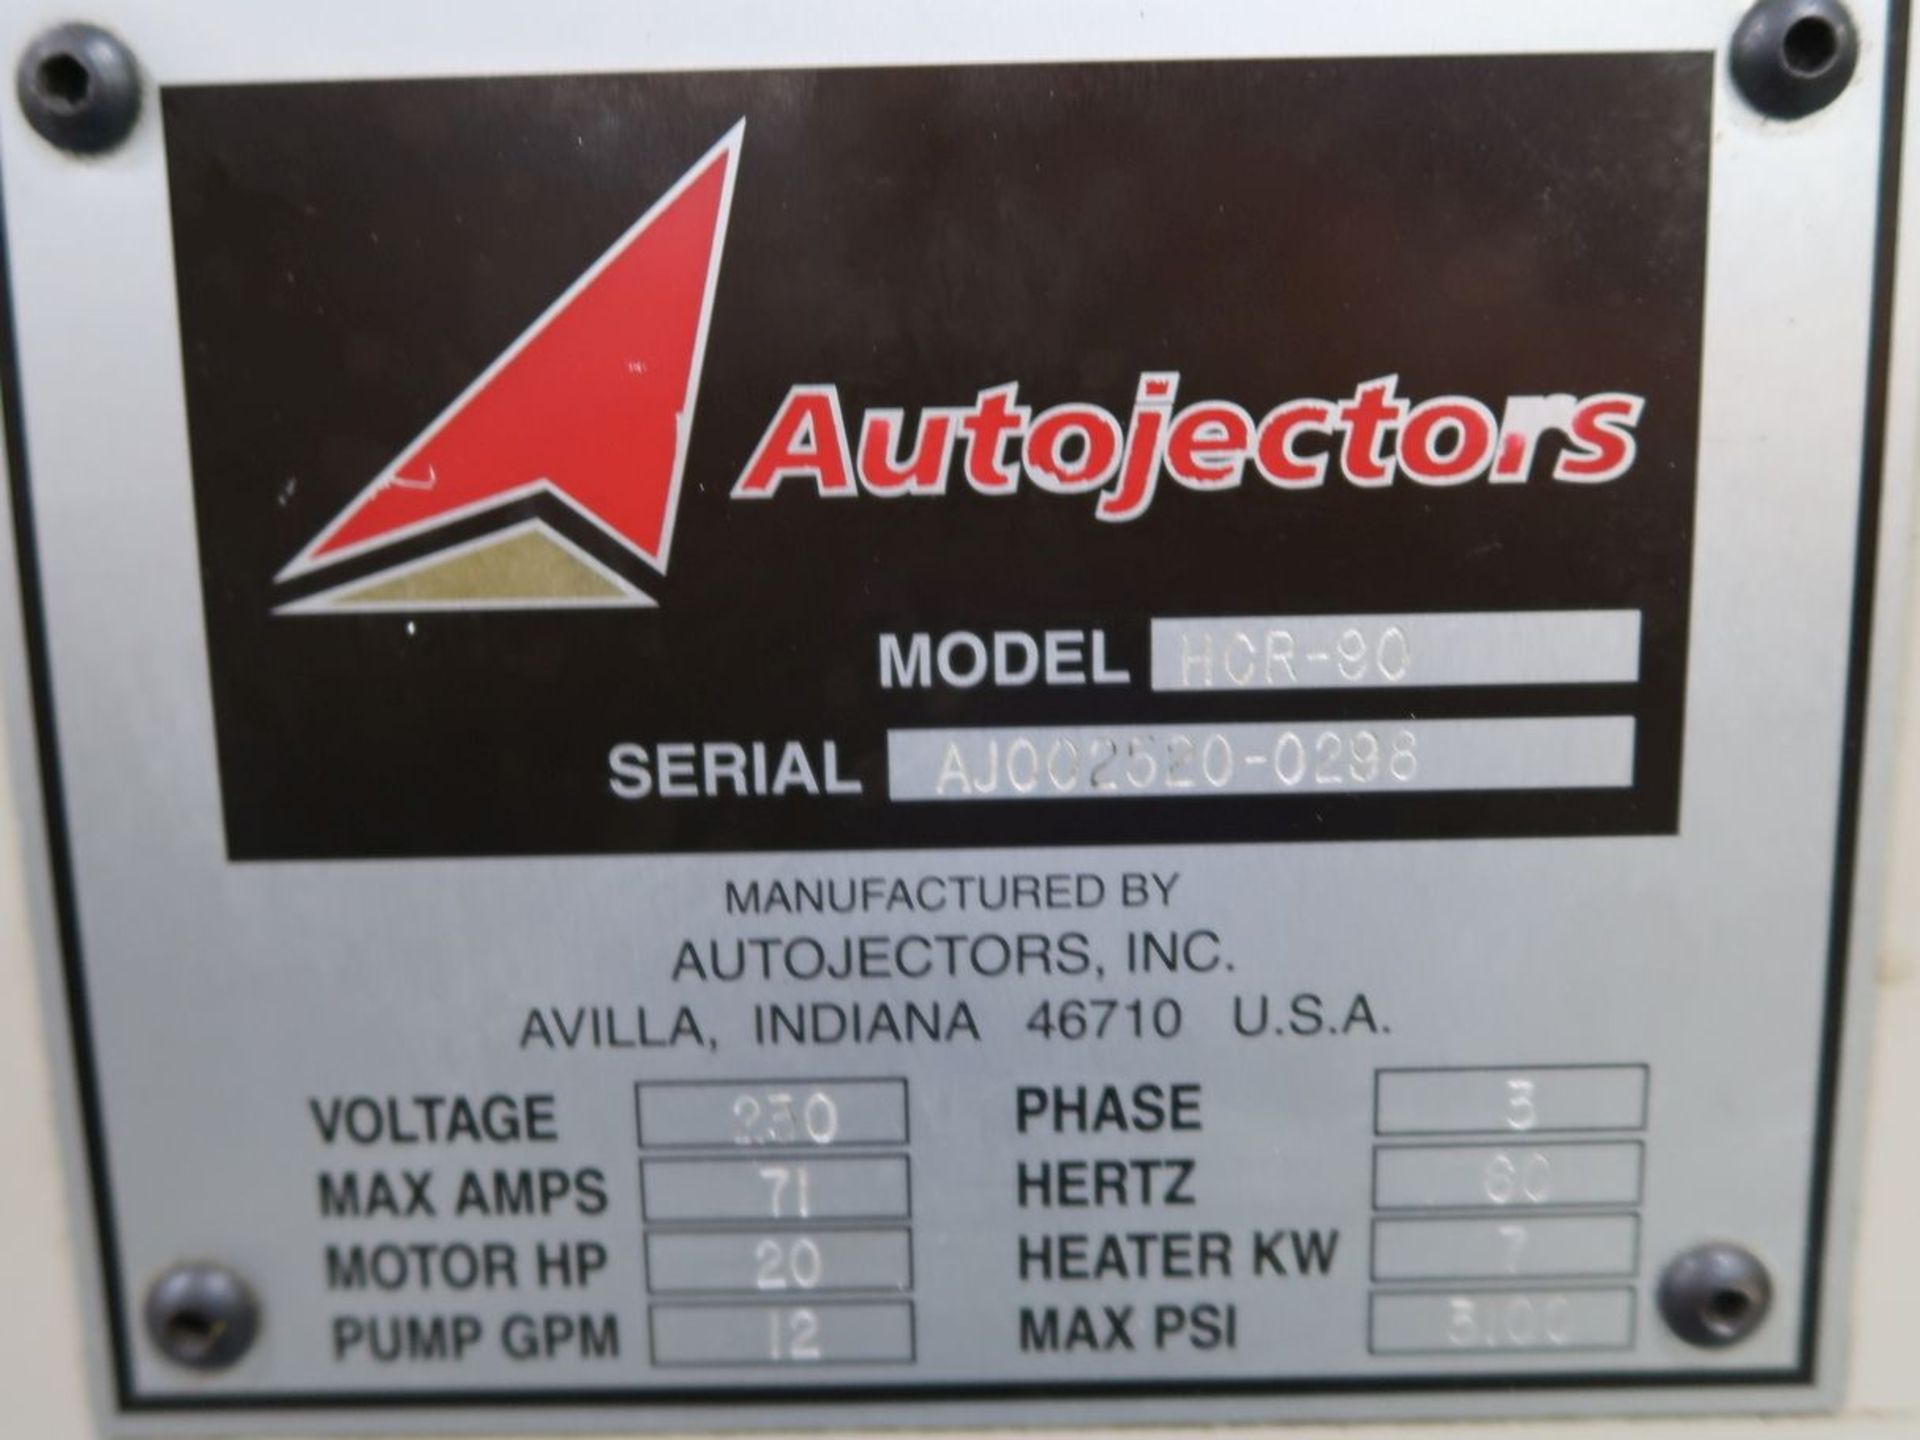 90-TON X 4.44-OZ. AUTOJECTORS HCR-90 ROTARY TABLE VERTICAL PLASTIC INJECTION MOLDING (1998) - Image 16 of 16